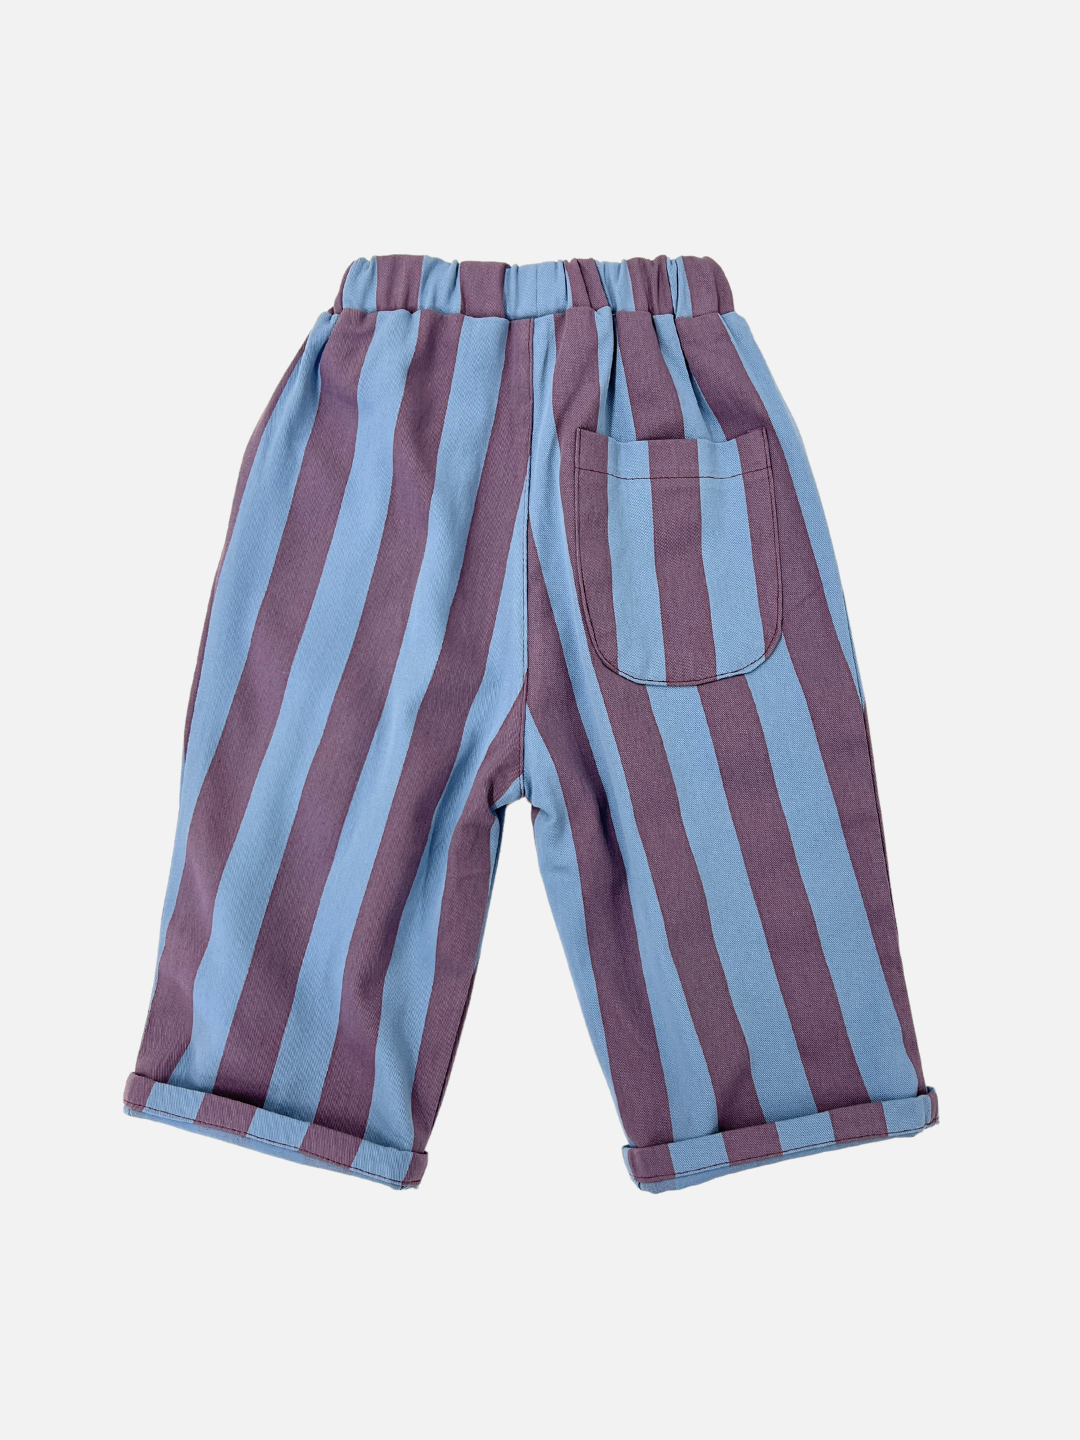 Purple | Back view of kids baggy pants in blue with wide purple vertical stripes.